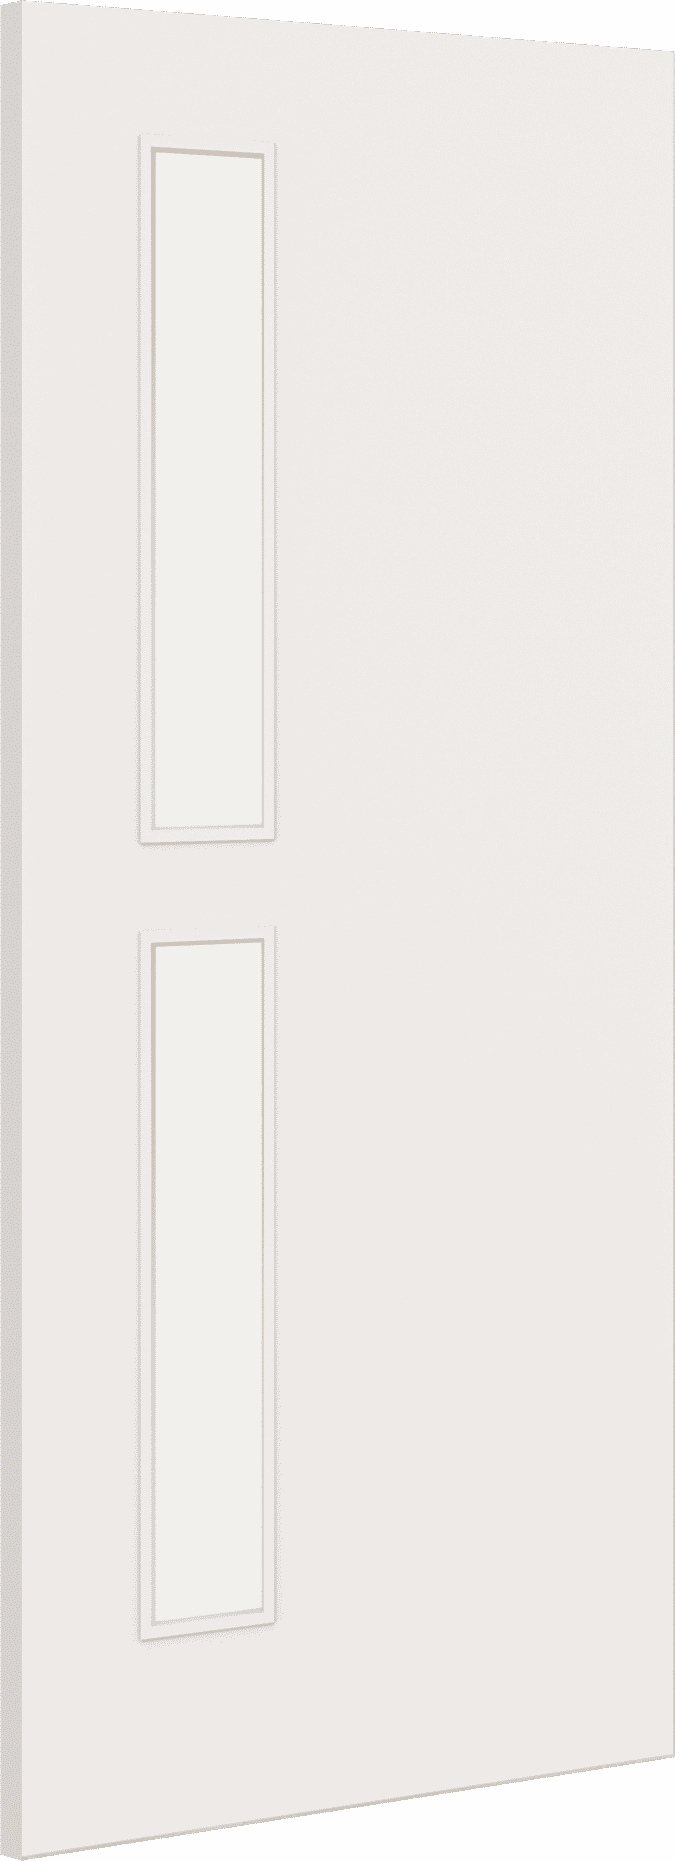 1981mm x 838mm x 44mm (33") Architectural Paint Grade White 07 Frosted Glazed Fire Door Blank